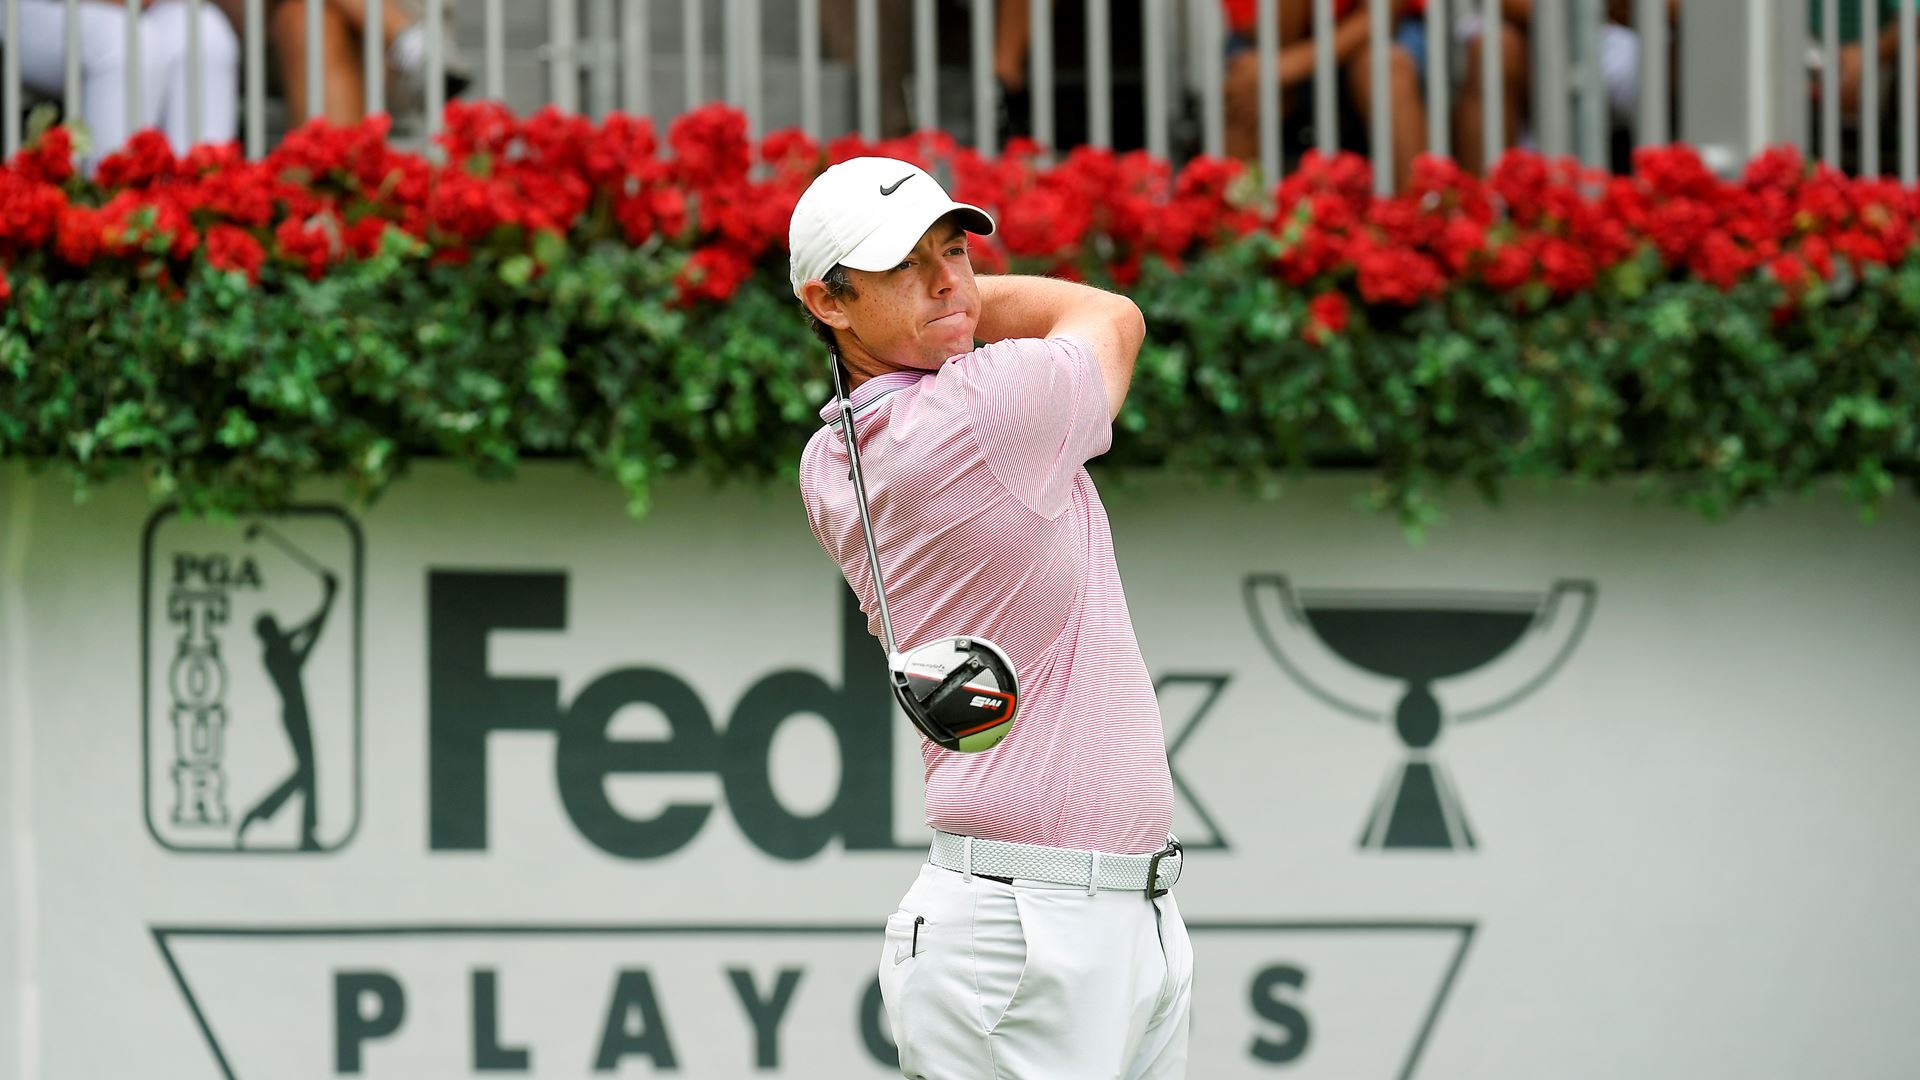 Rory McIlroy Wins FedEx Cup and TOUR Championship Using 14 TaylorMade Clubs and Golf Ball